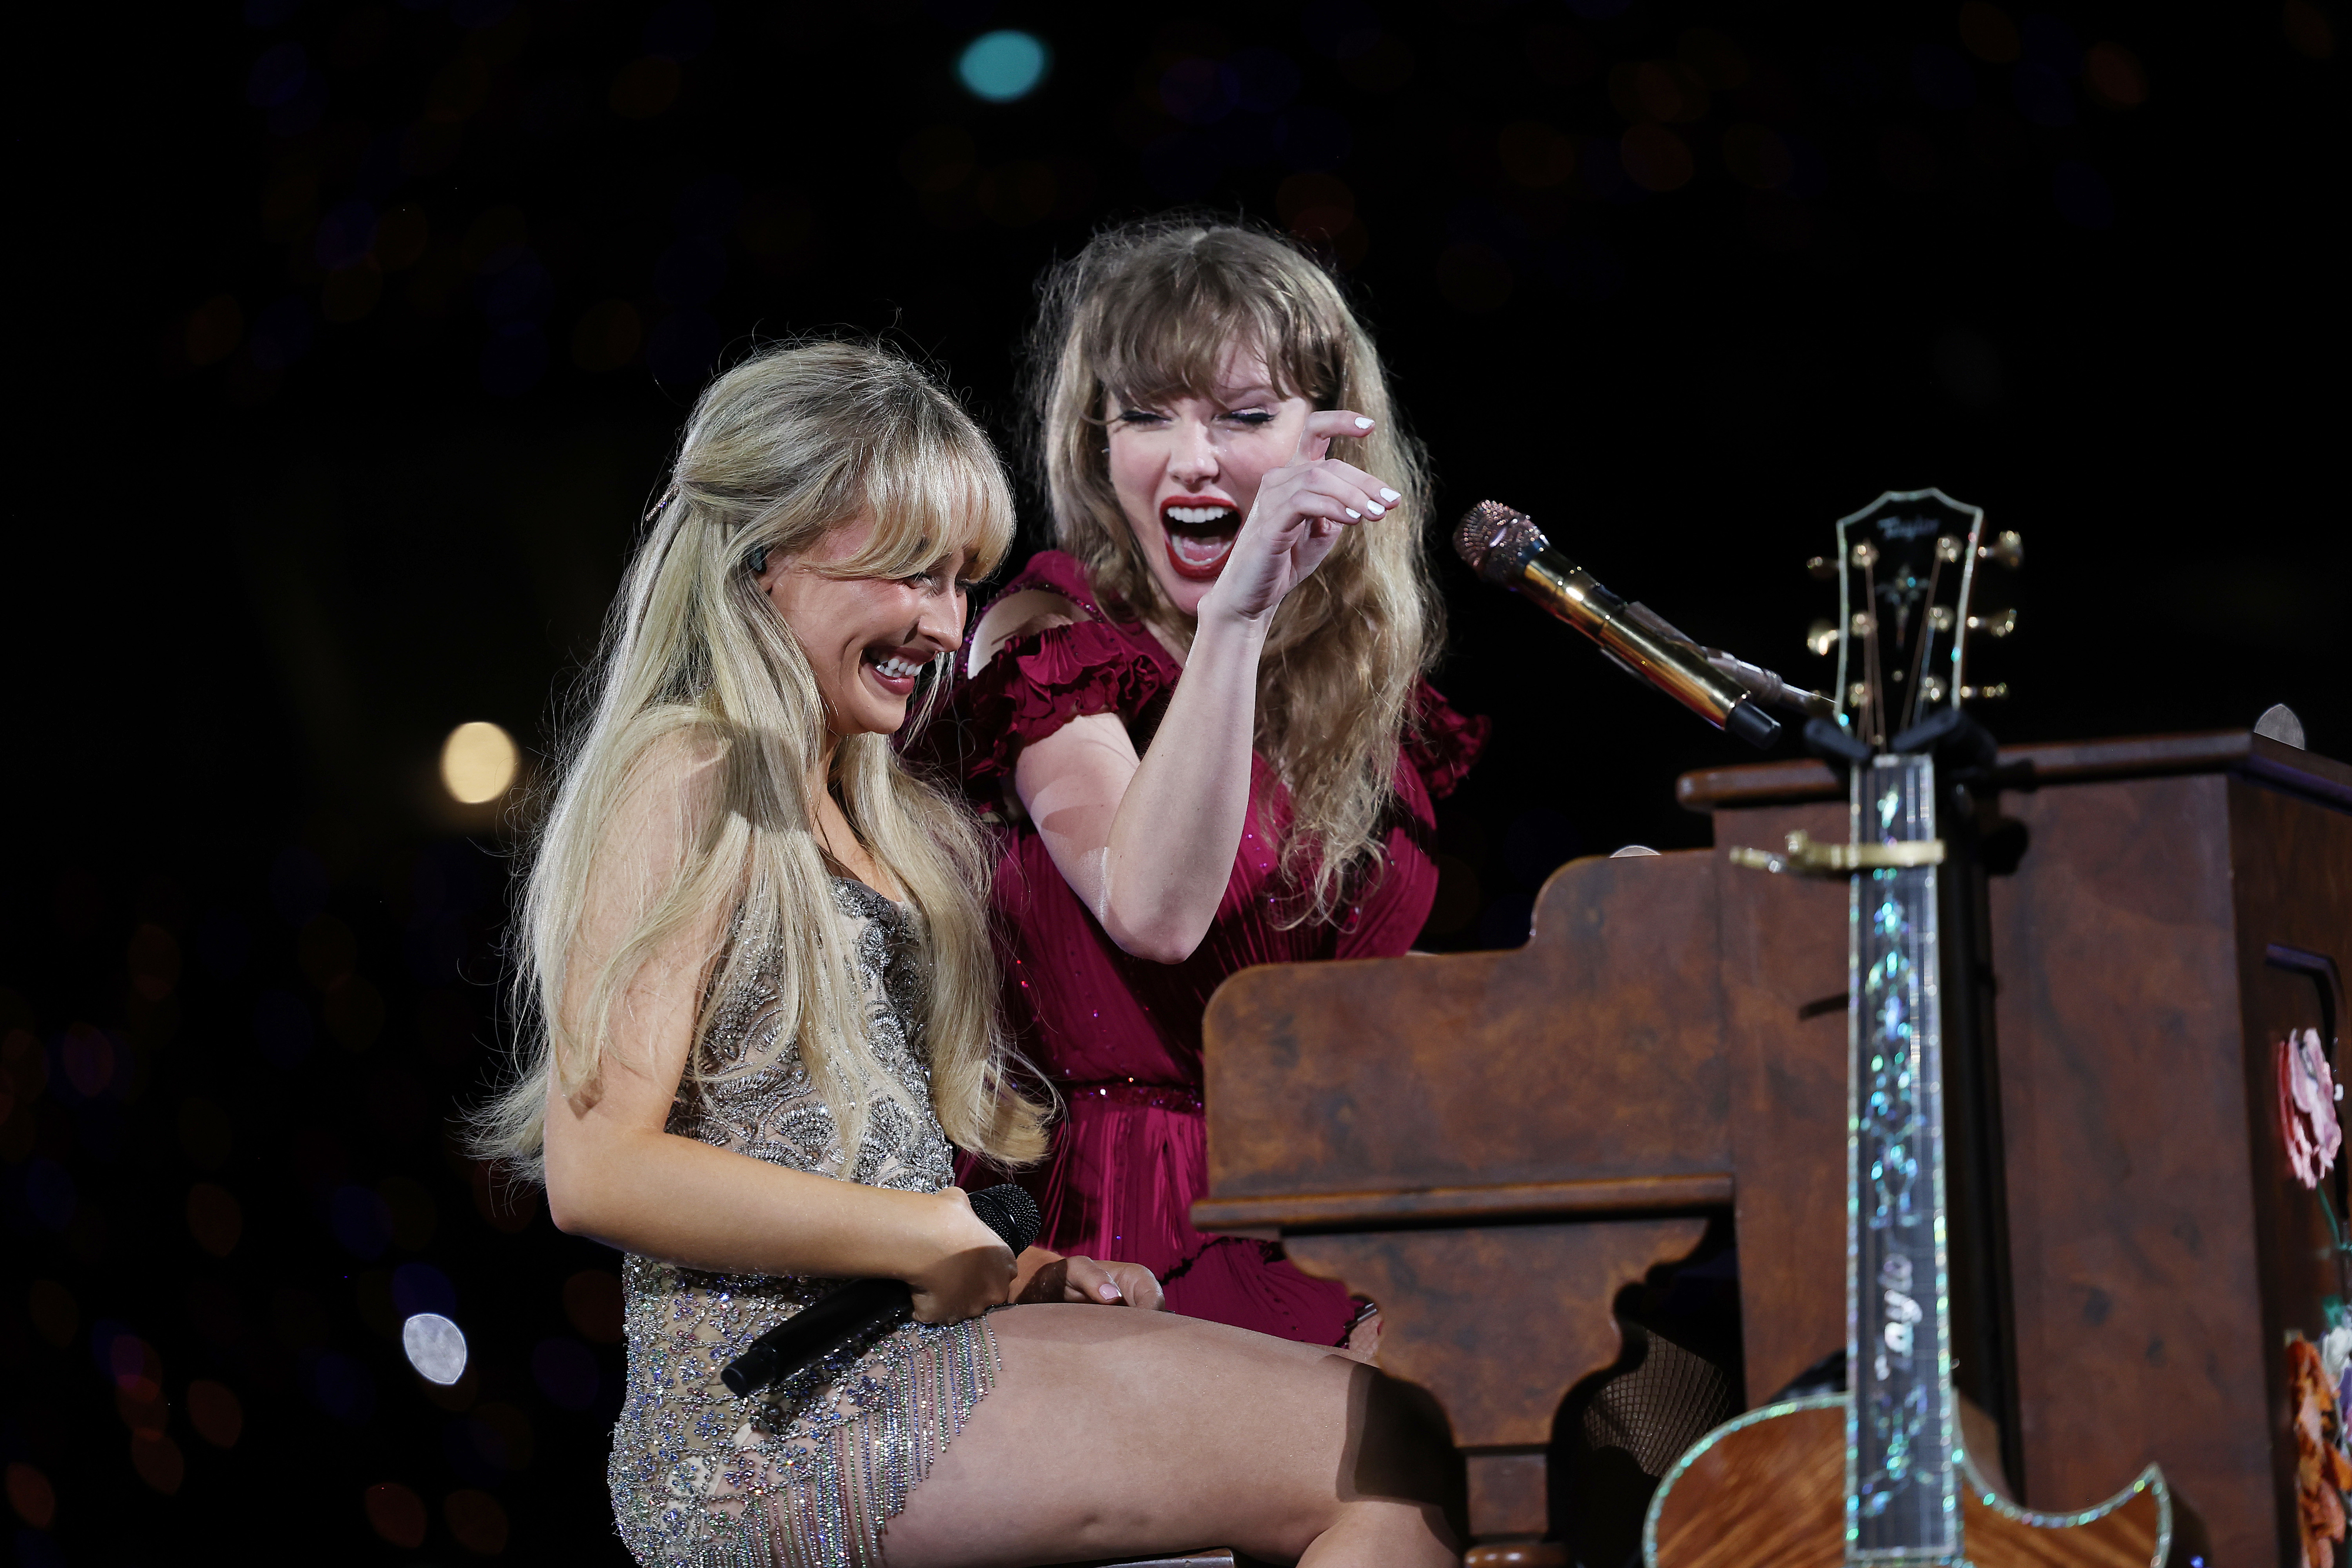 Sabrina Carpenter is in a sparkly dress, and Taylor Swift is in a red dress, joyfully performing at a piano on stage. Taylor Swift is pointing and smiling